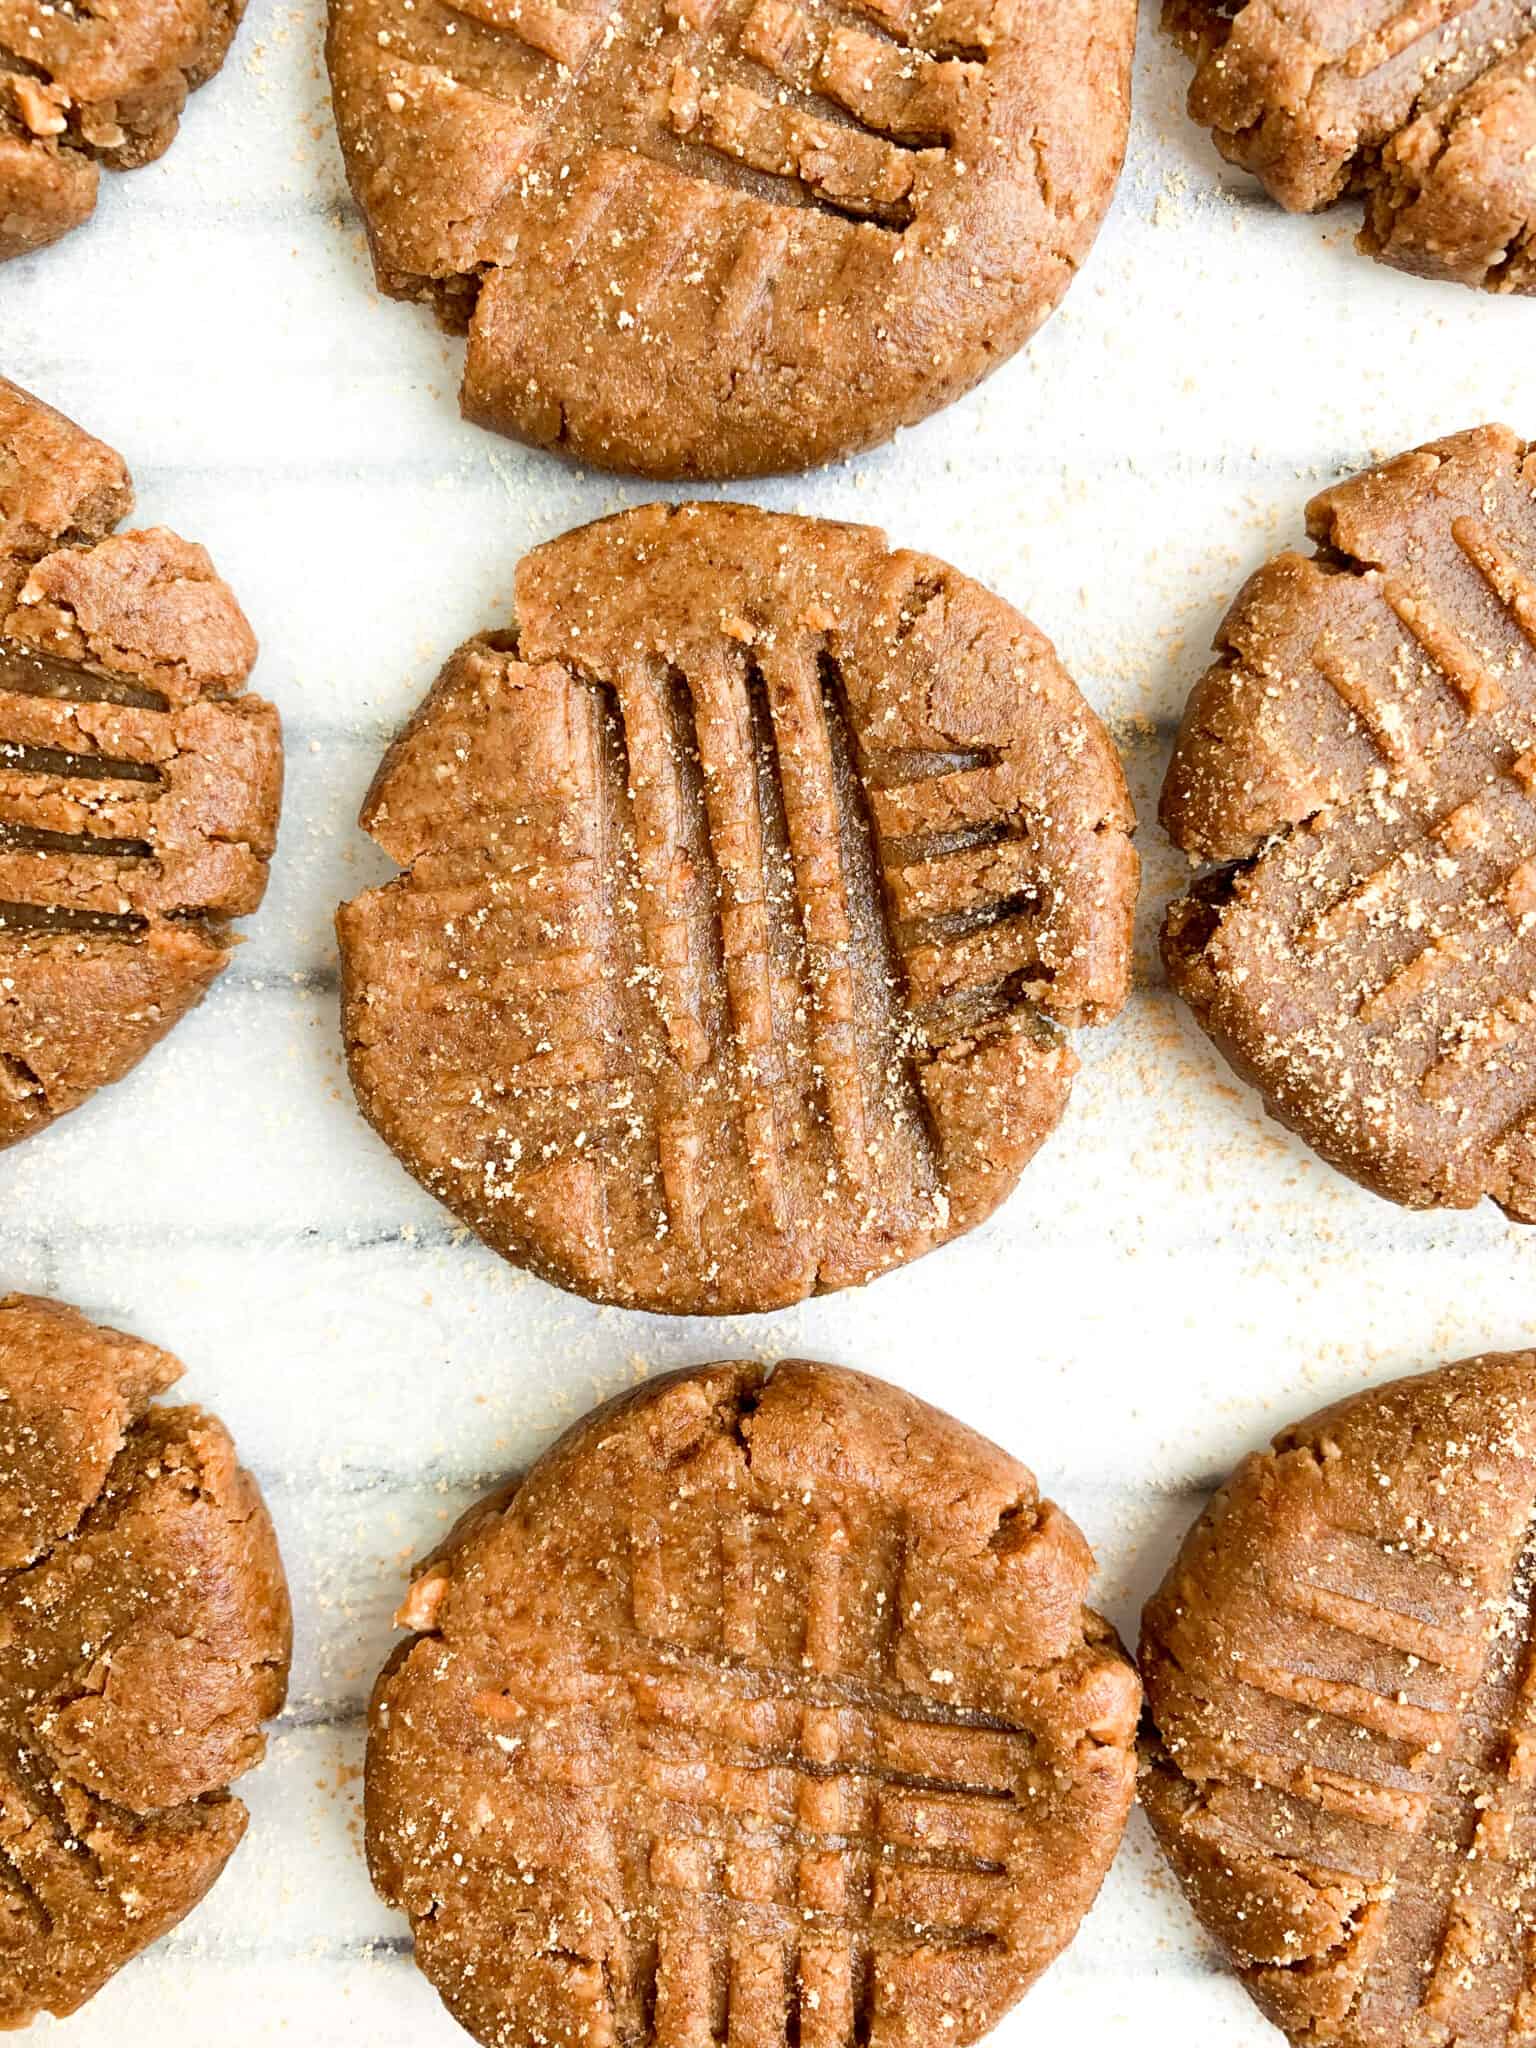 Easy gluten-free peanut butter cookies on a white surface.